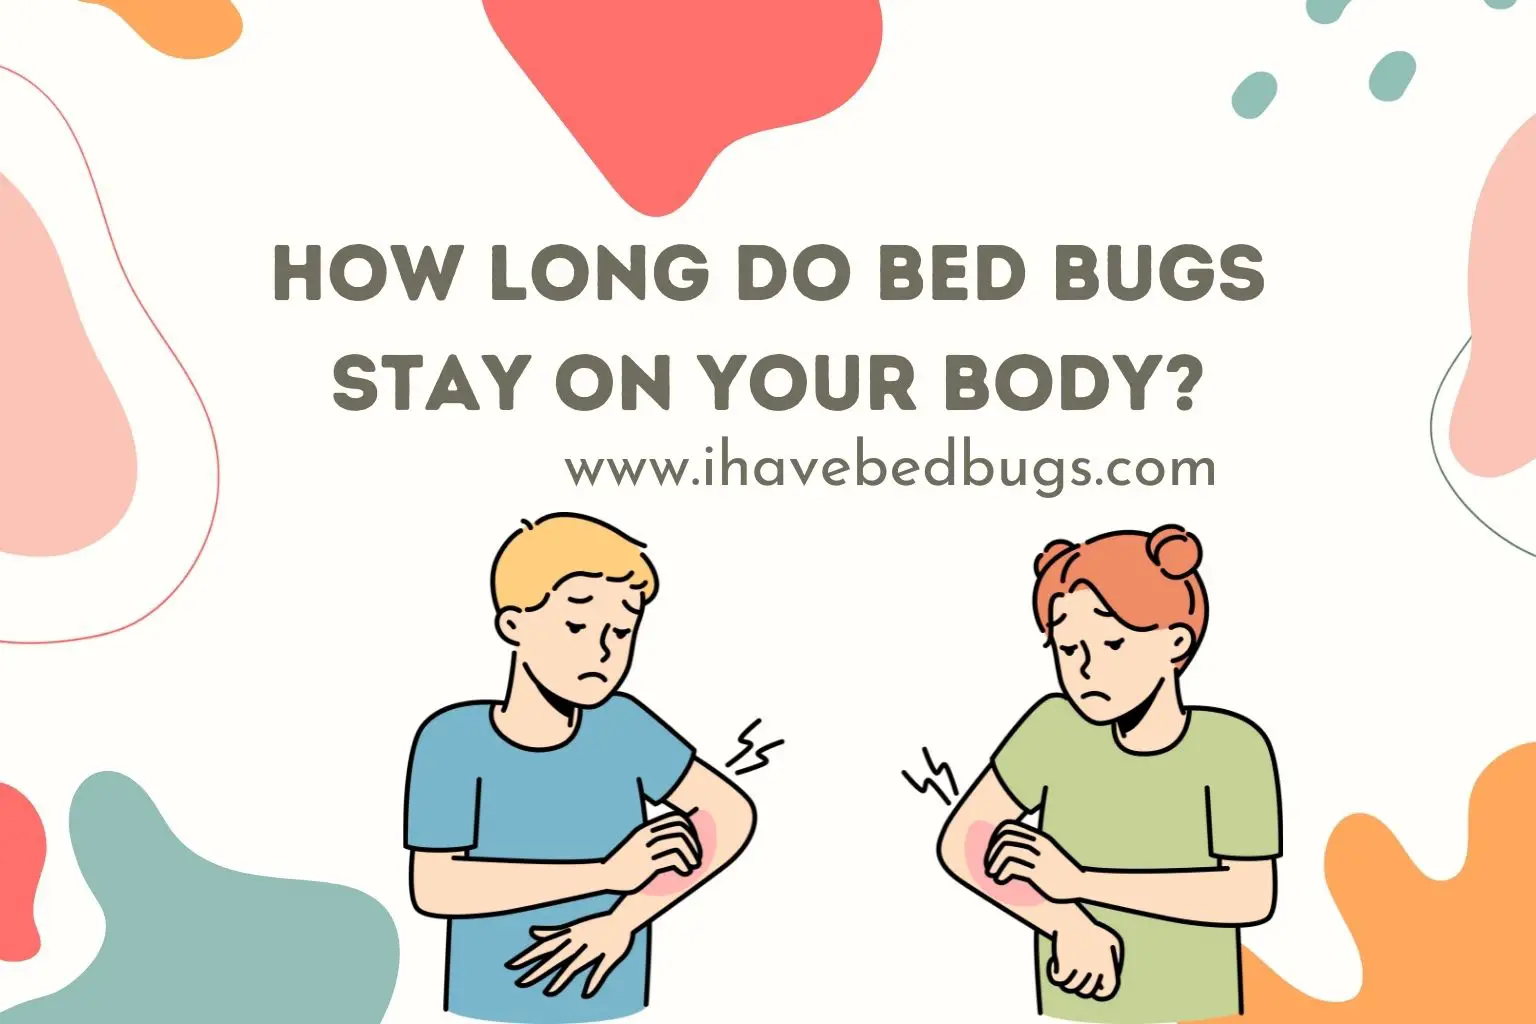 How long do bed bugs stay on your body